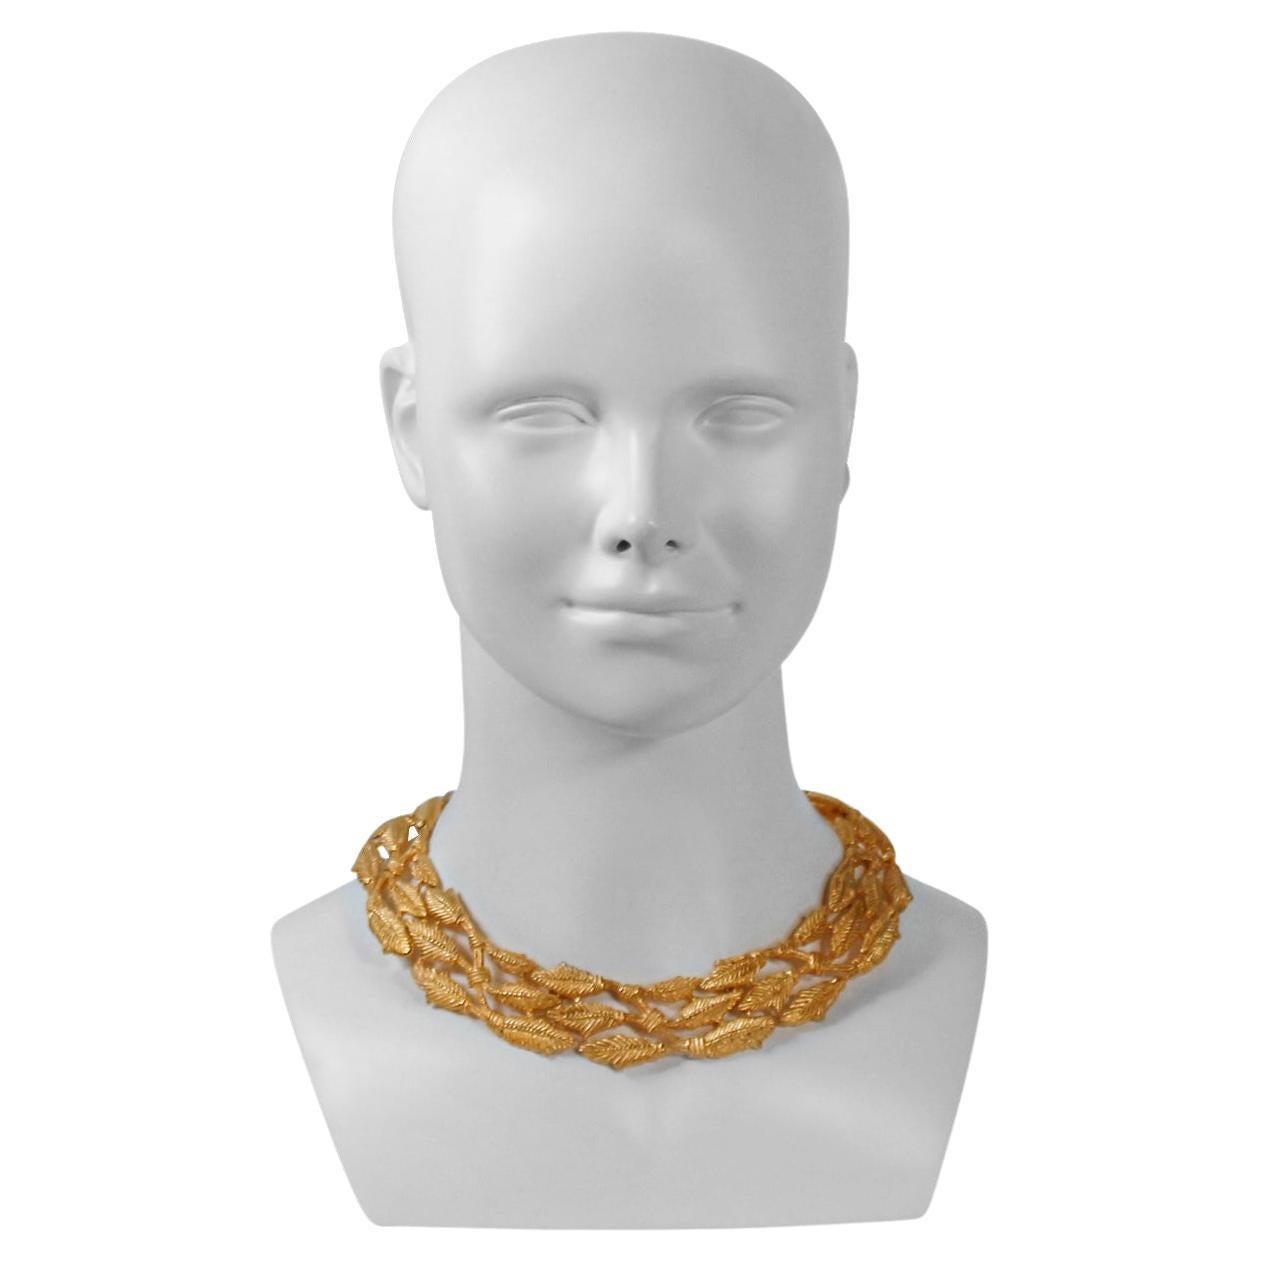 Vintage Givenchy Gold Necklace with Wheat Pattern interspersed around in three rows. Textured.  There are Hoops on my site that Match. Wheat is the symbol for abundance.  This necklace is far more magnificent in person. 
Worn with the hoops or any